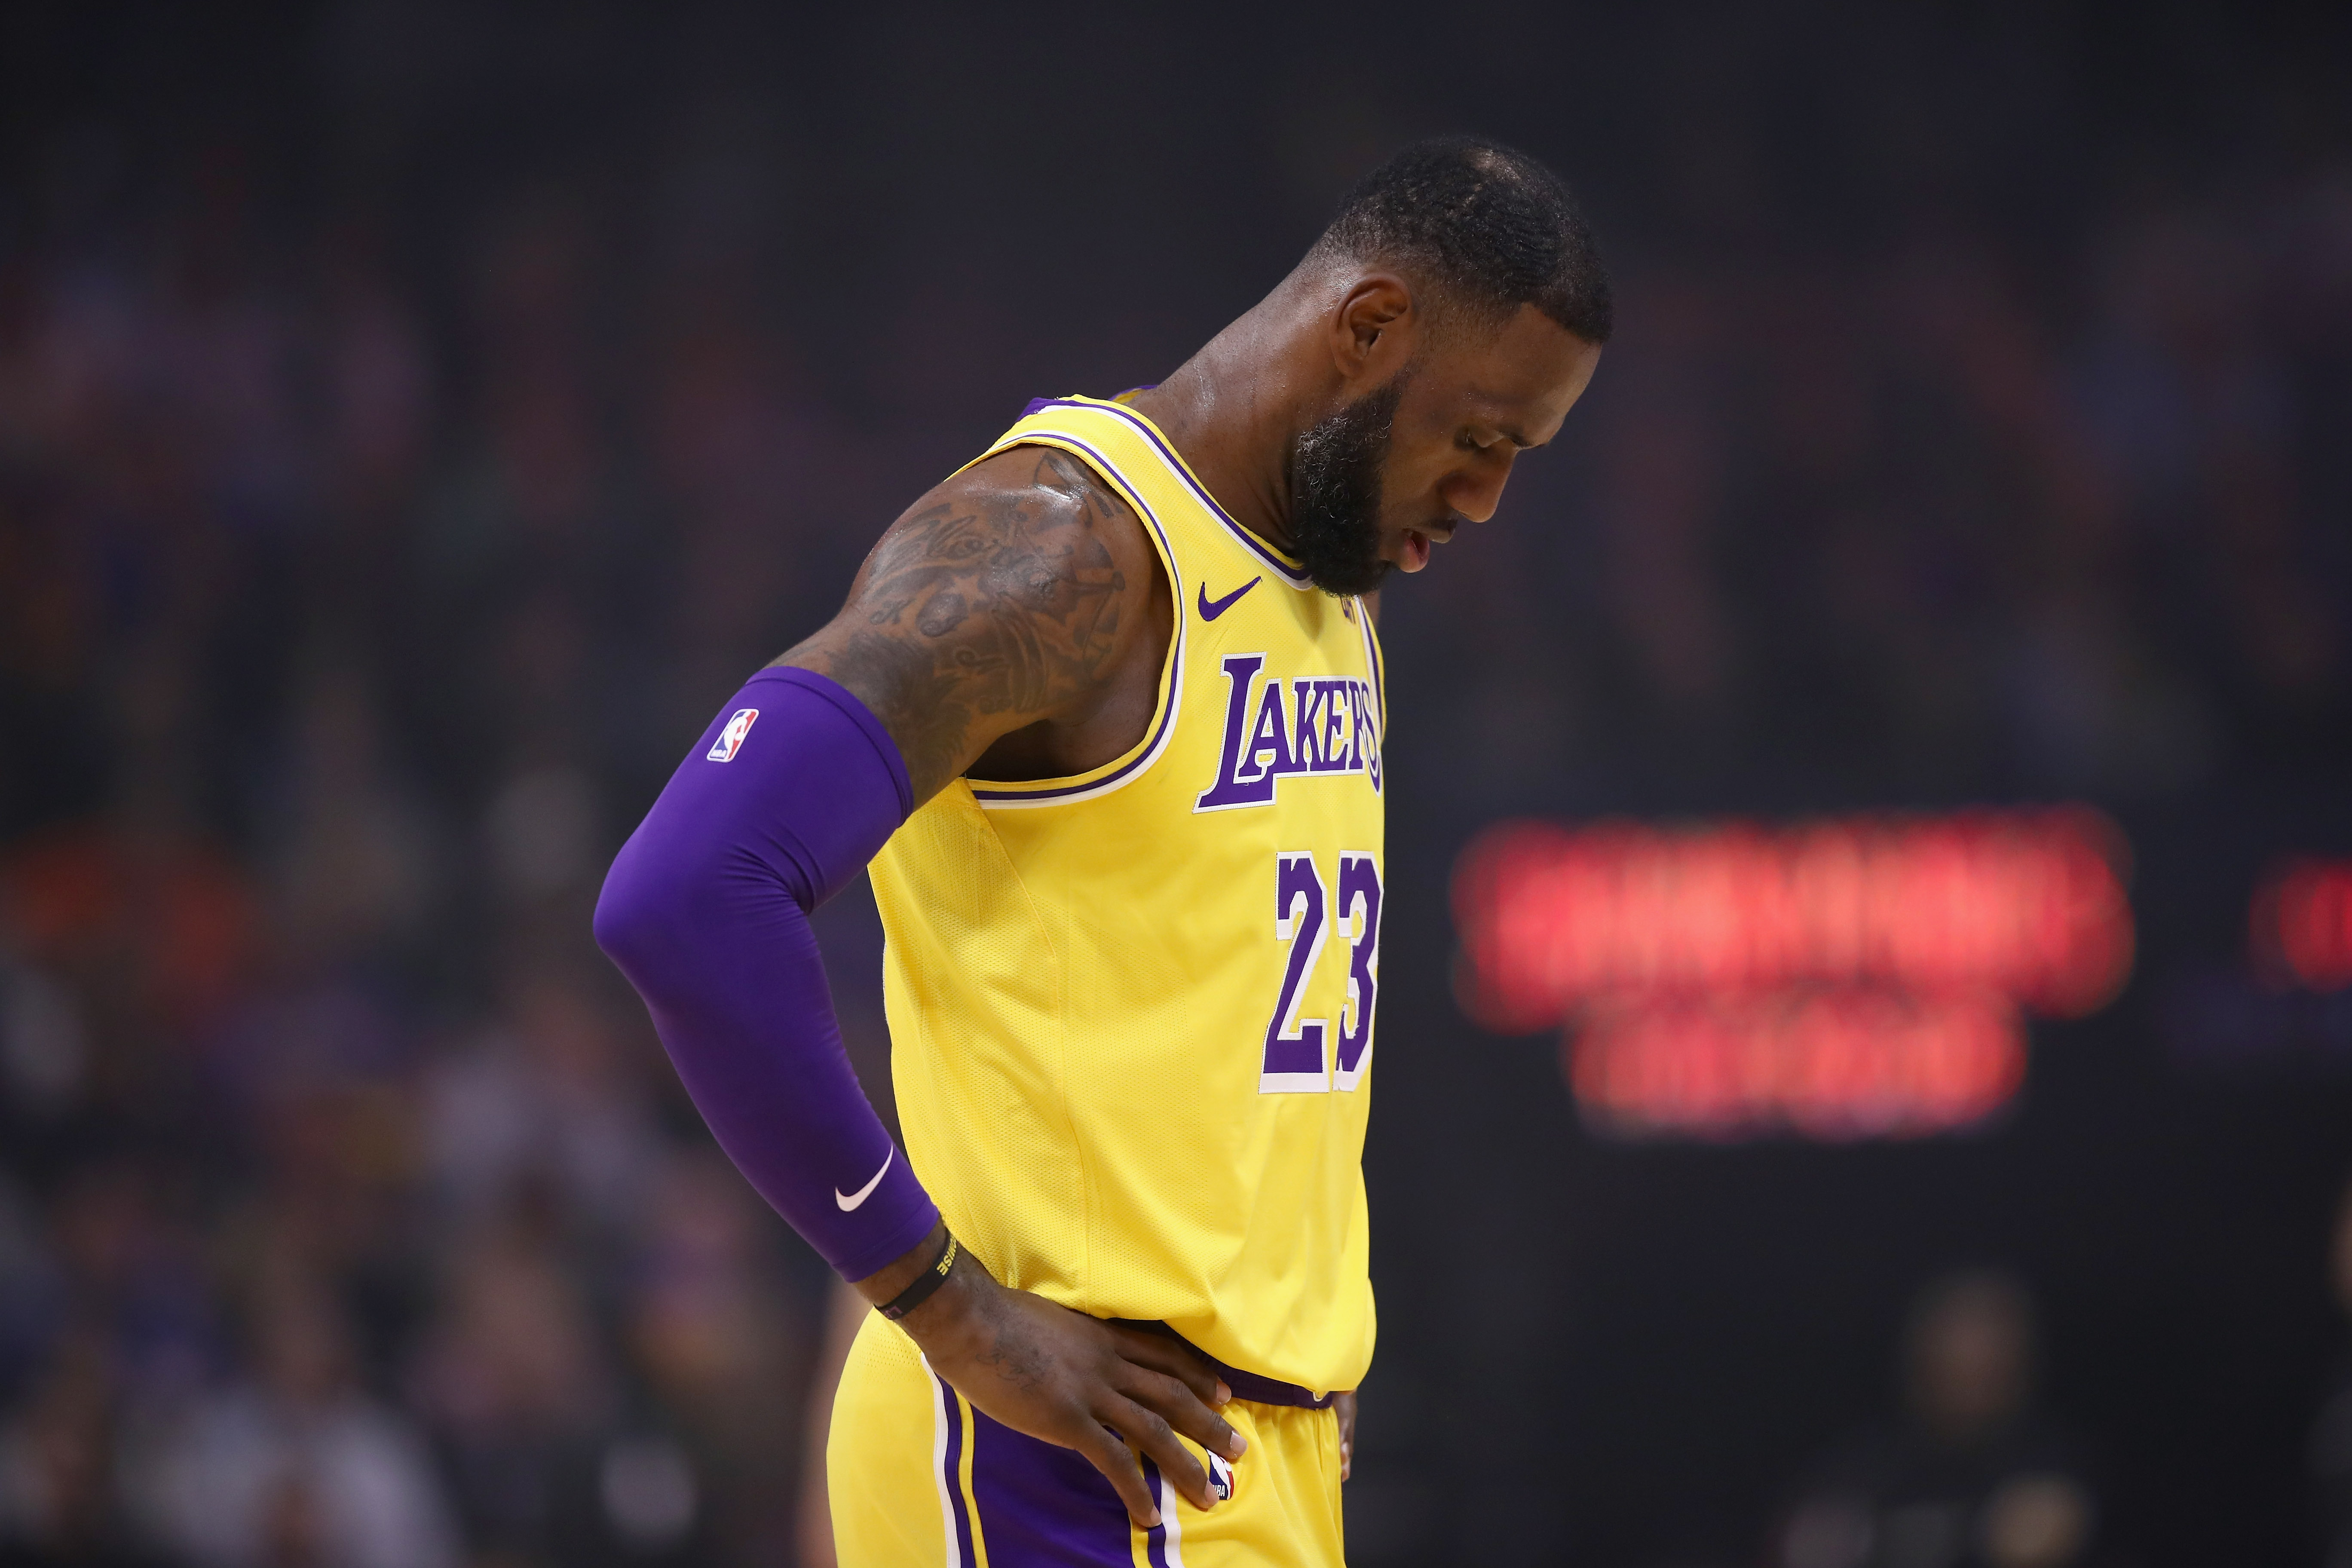 LeBron James Won’t Play Against The Bucks Due To A Sore Left Groin